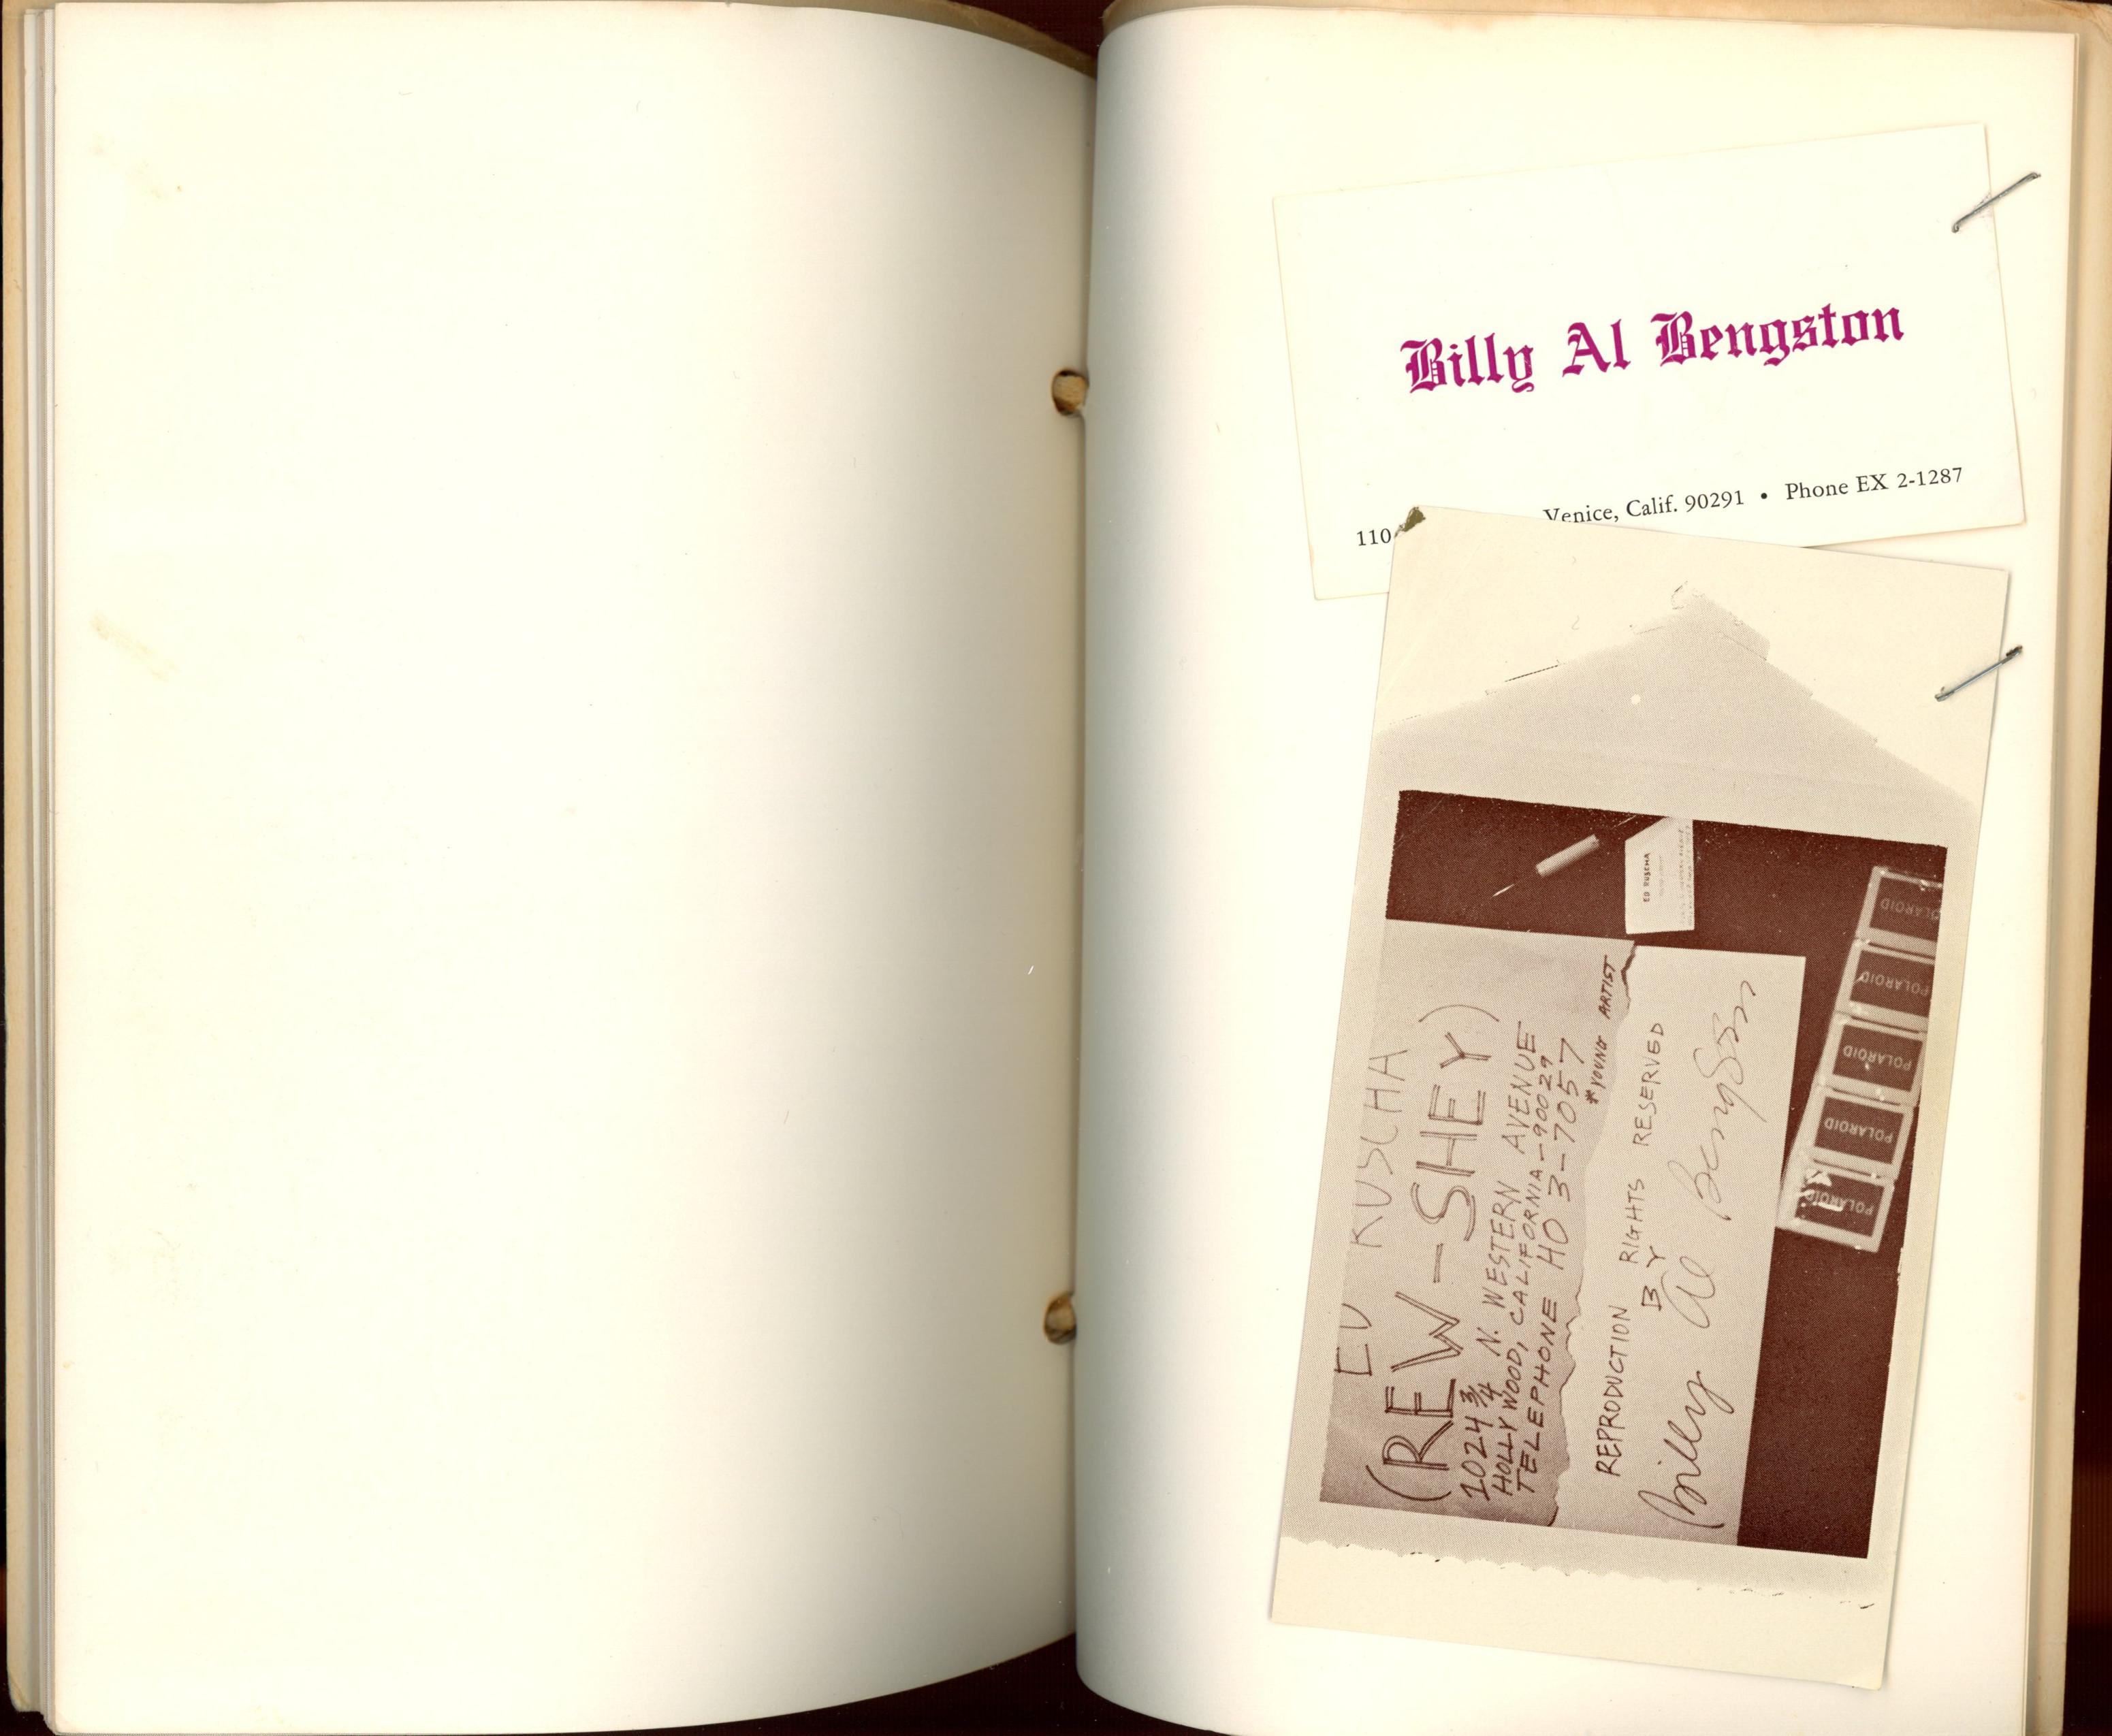 Lt. Ed. Artist Book: Business Cards (Signed by Ed Ruscha and Billy Al Bengston) For Sale 7